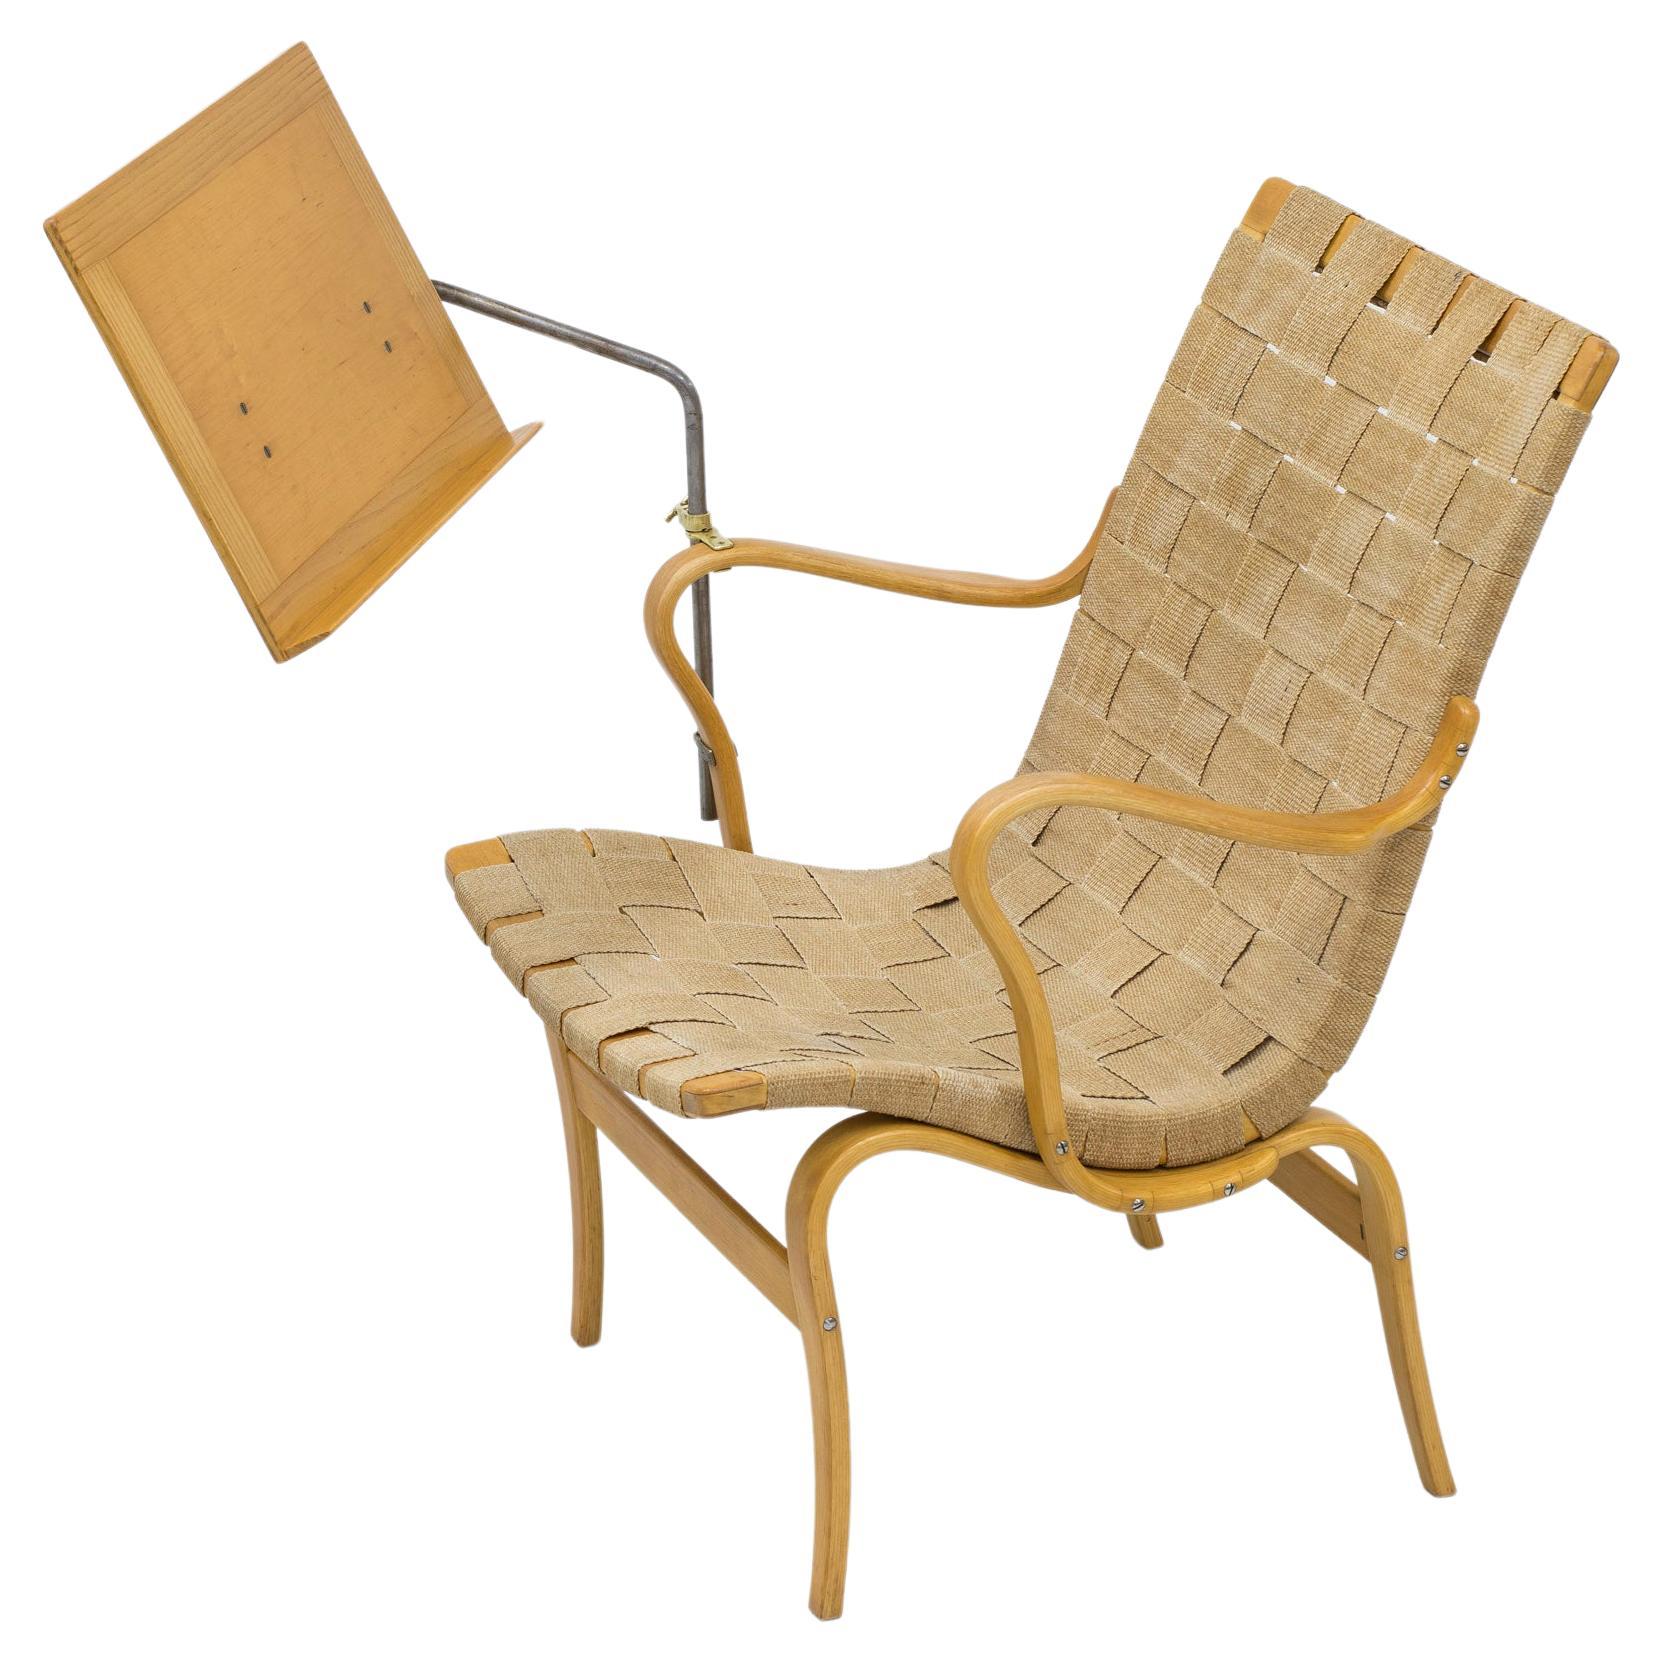 "Eva" arm chair with reading table by Bruno Mathsson, Karl Mathsson, 1959 For Sale